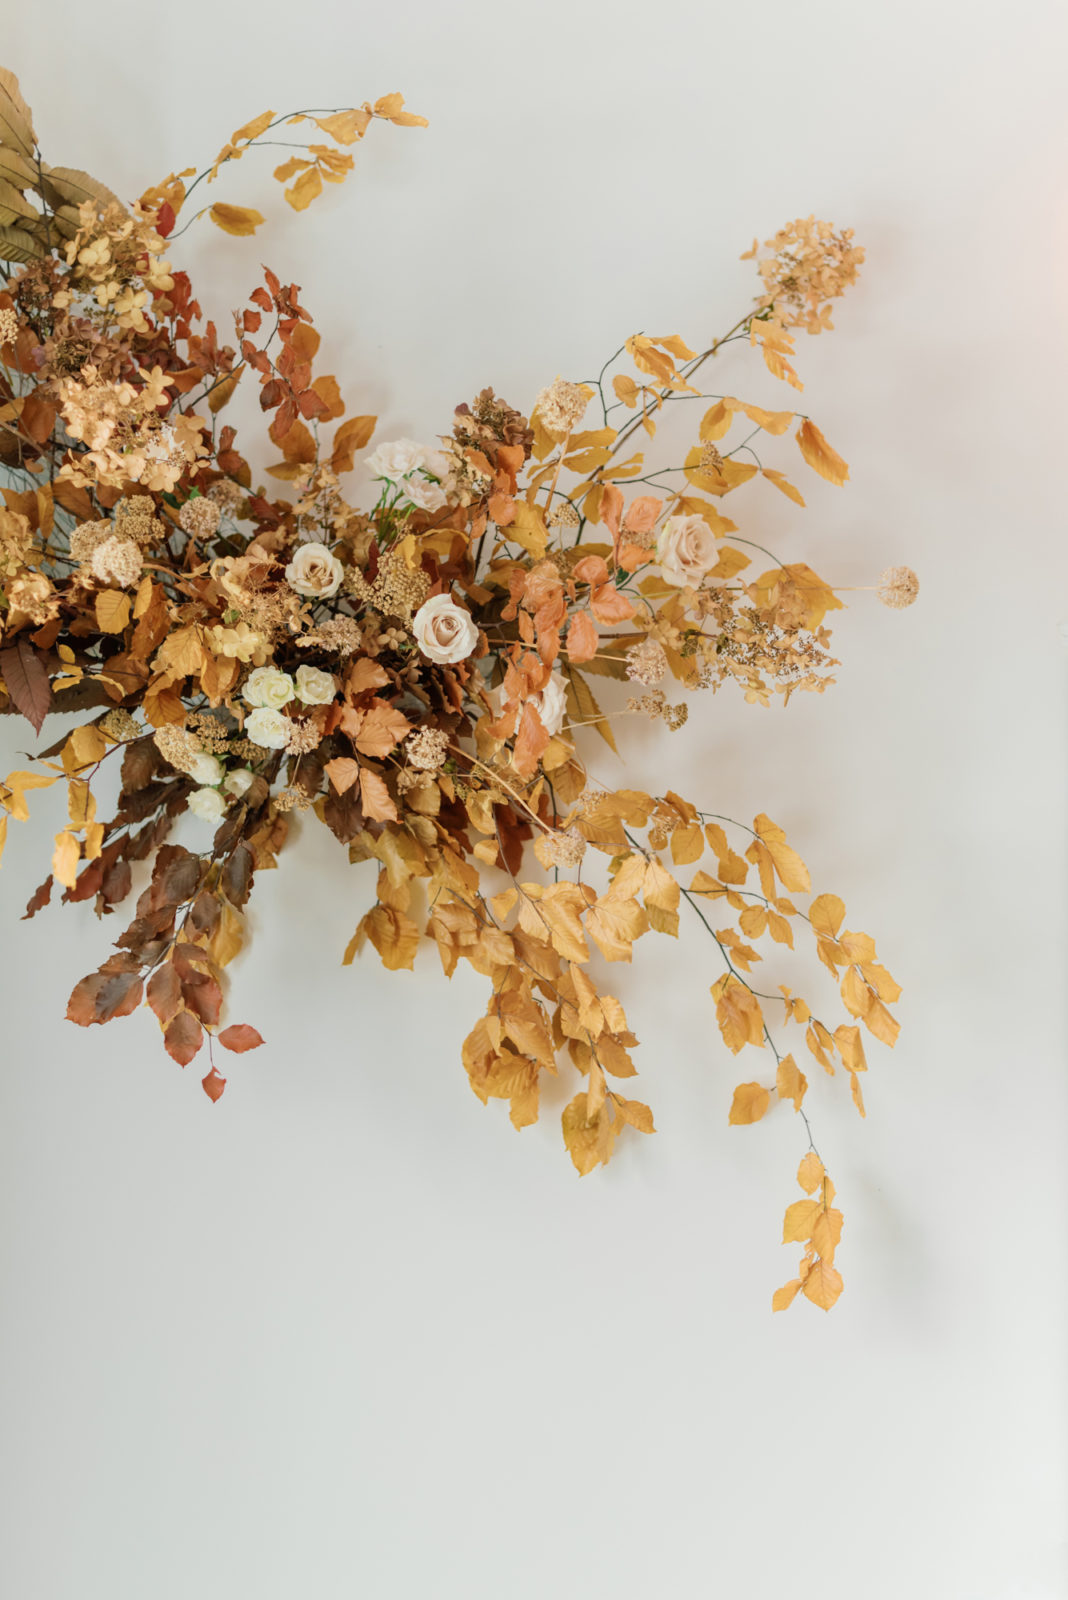 modern bridal style, autumn bridal looks, fall floral bouquet inspiration, dried floral accents